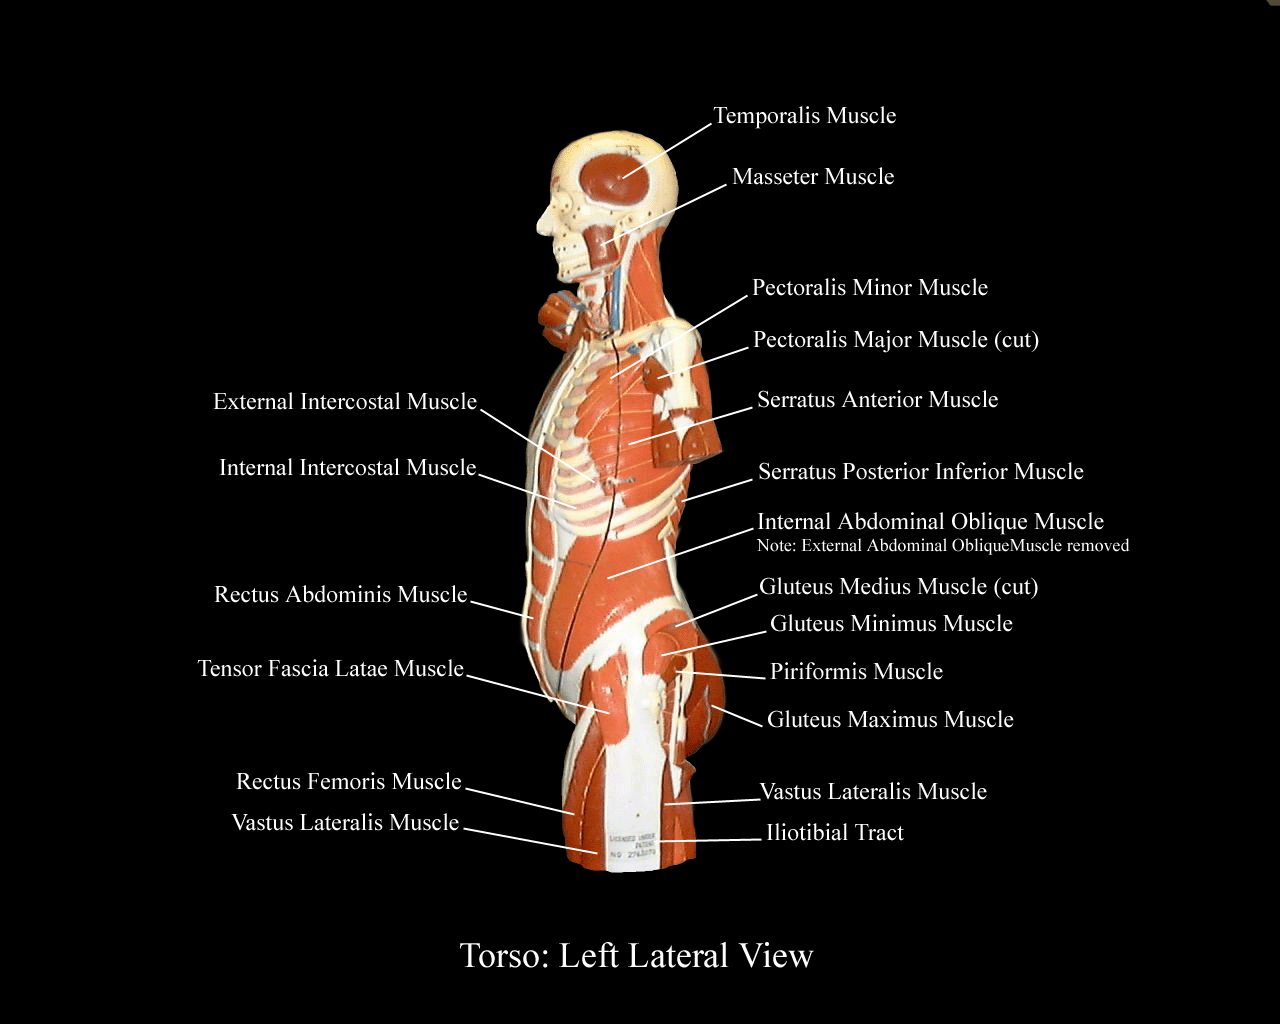 a labeled picture of the muscles on a torso model from a left view